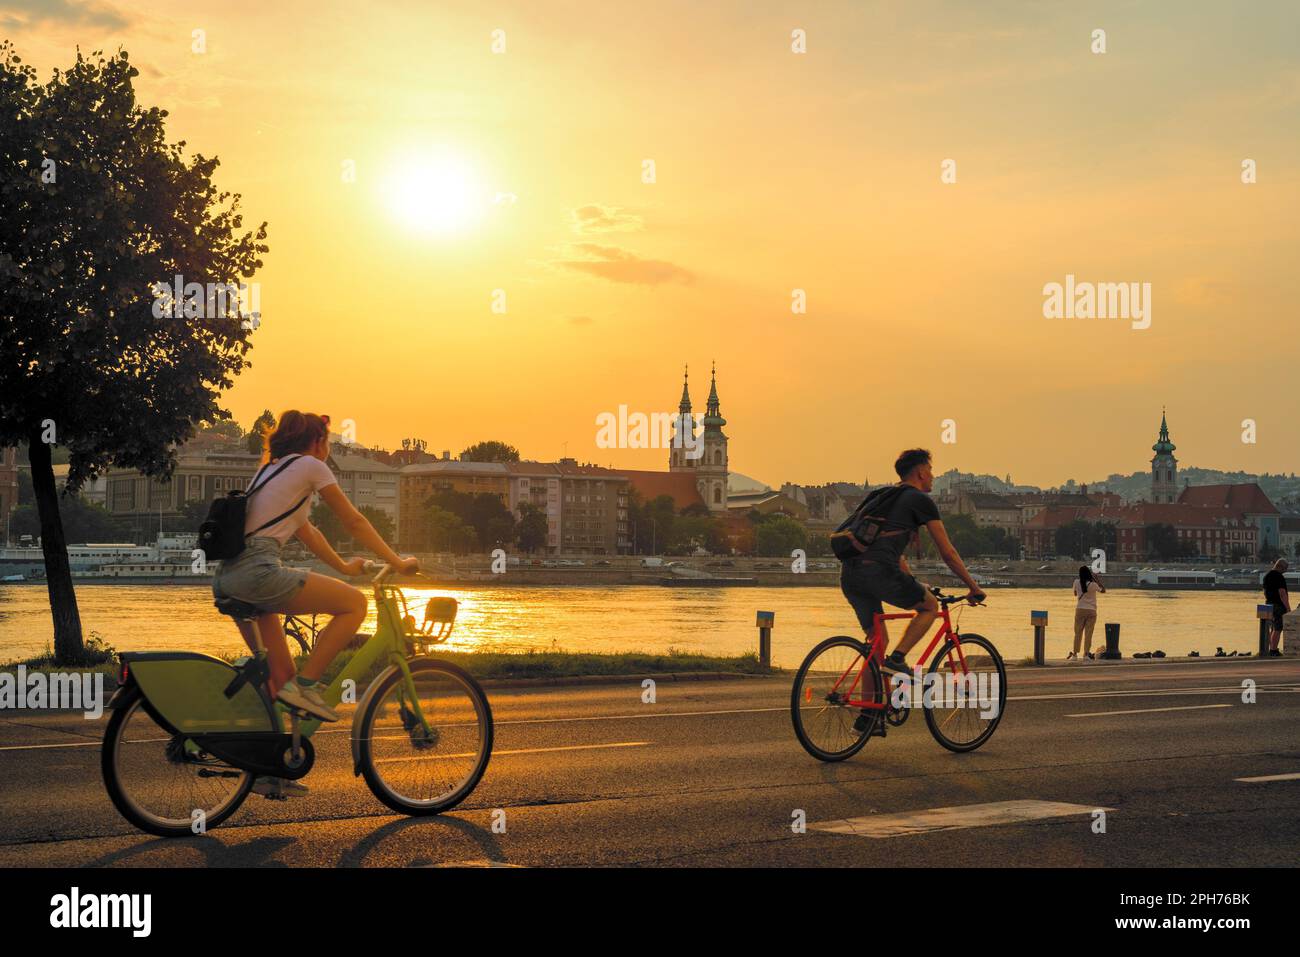 Bicyclists riding along river against sunset in old city Stock Photo